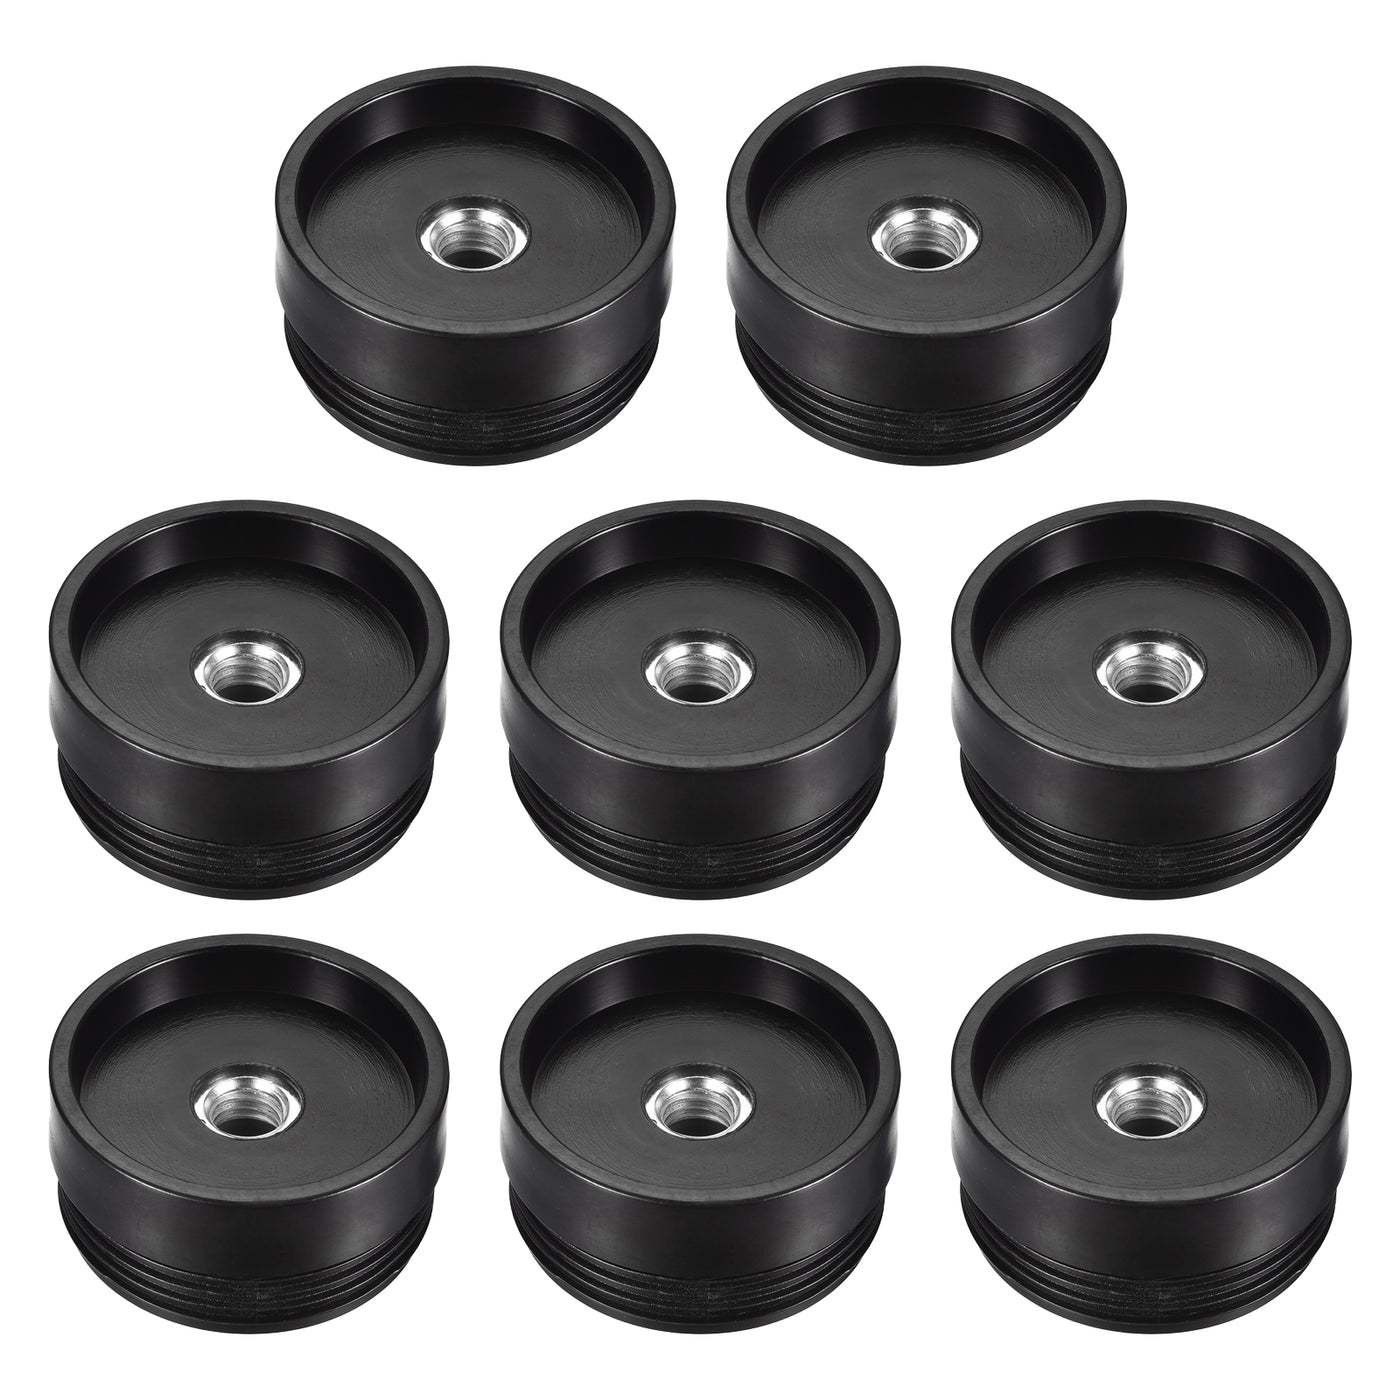 uxcell Uxcell 8Pcs 60mm/2.36" Caster Insert with Thread, Round M12 Thread for Furniture